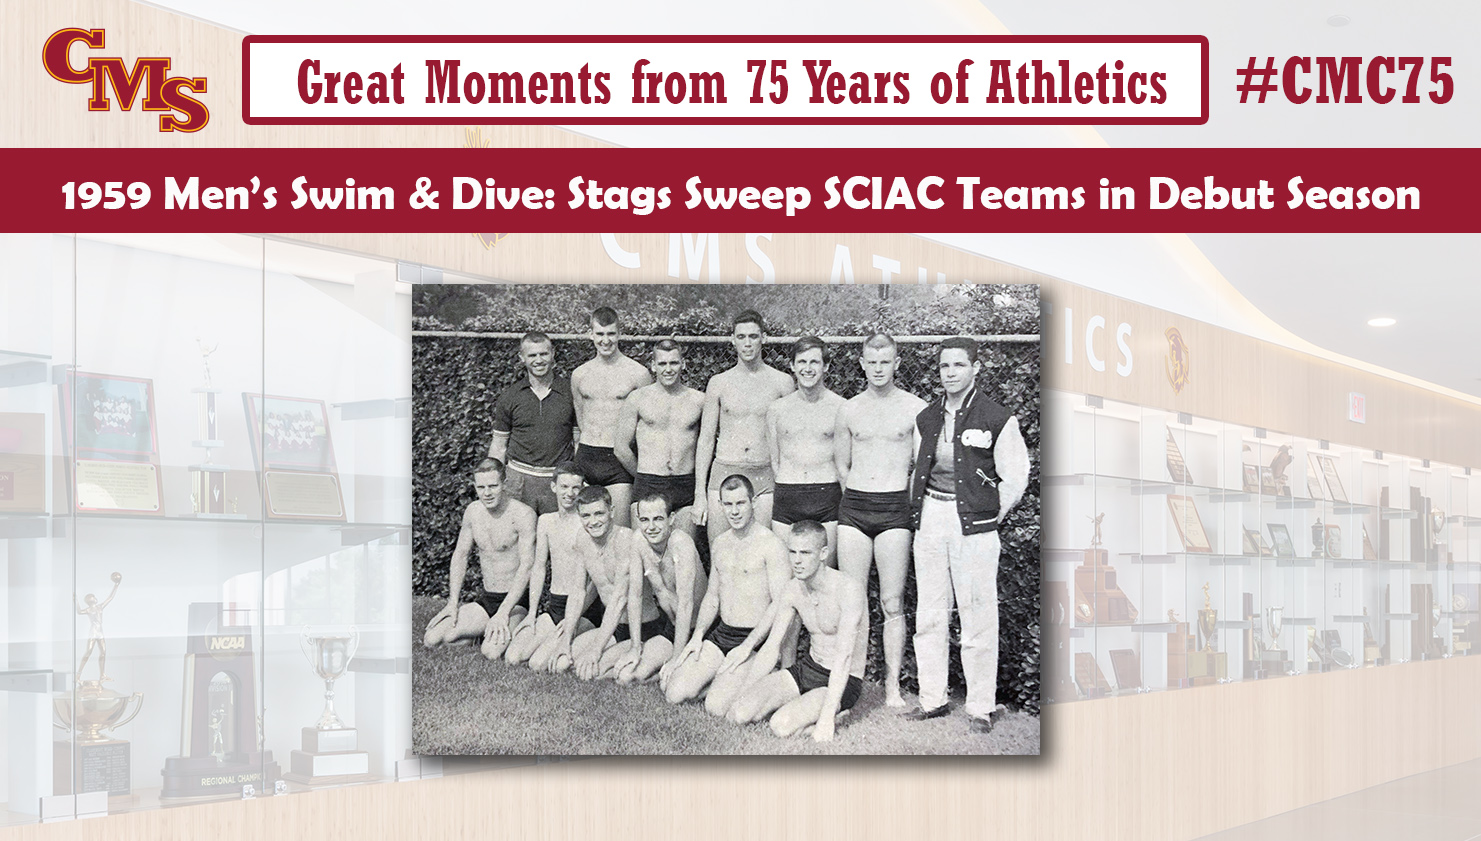 A team shot from the 1959 Swim and Dive team. Words over the photo read: Great Moments from 75 Years of Athletics. 1959 Swim & Dive: Stags Sweep SCIAC Teams in Debut Season